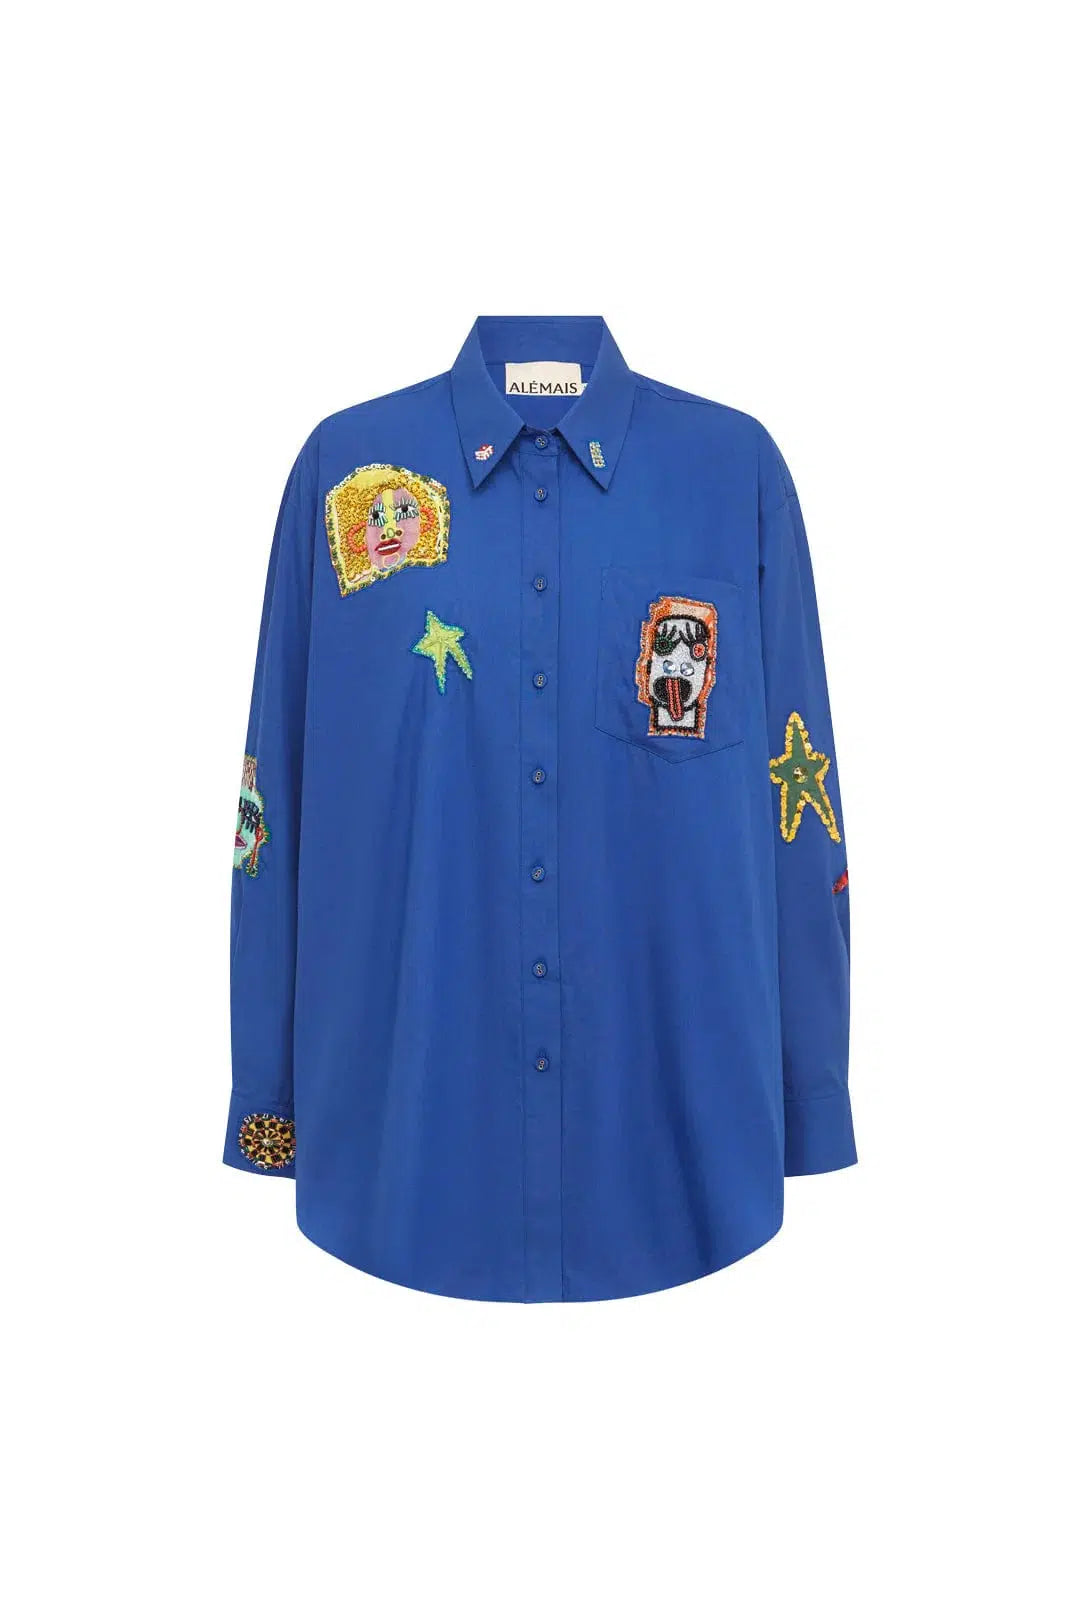 PLAYERS EMBROIDERED SHIRT BLUE-Shirt-Alemais-Debs Boutique